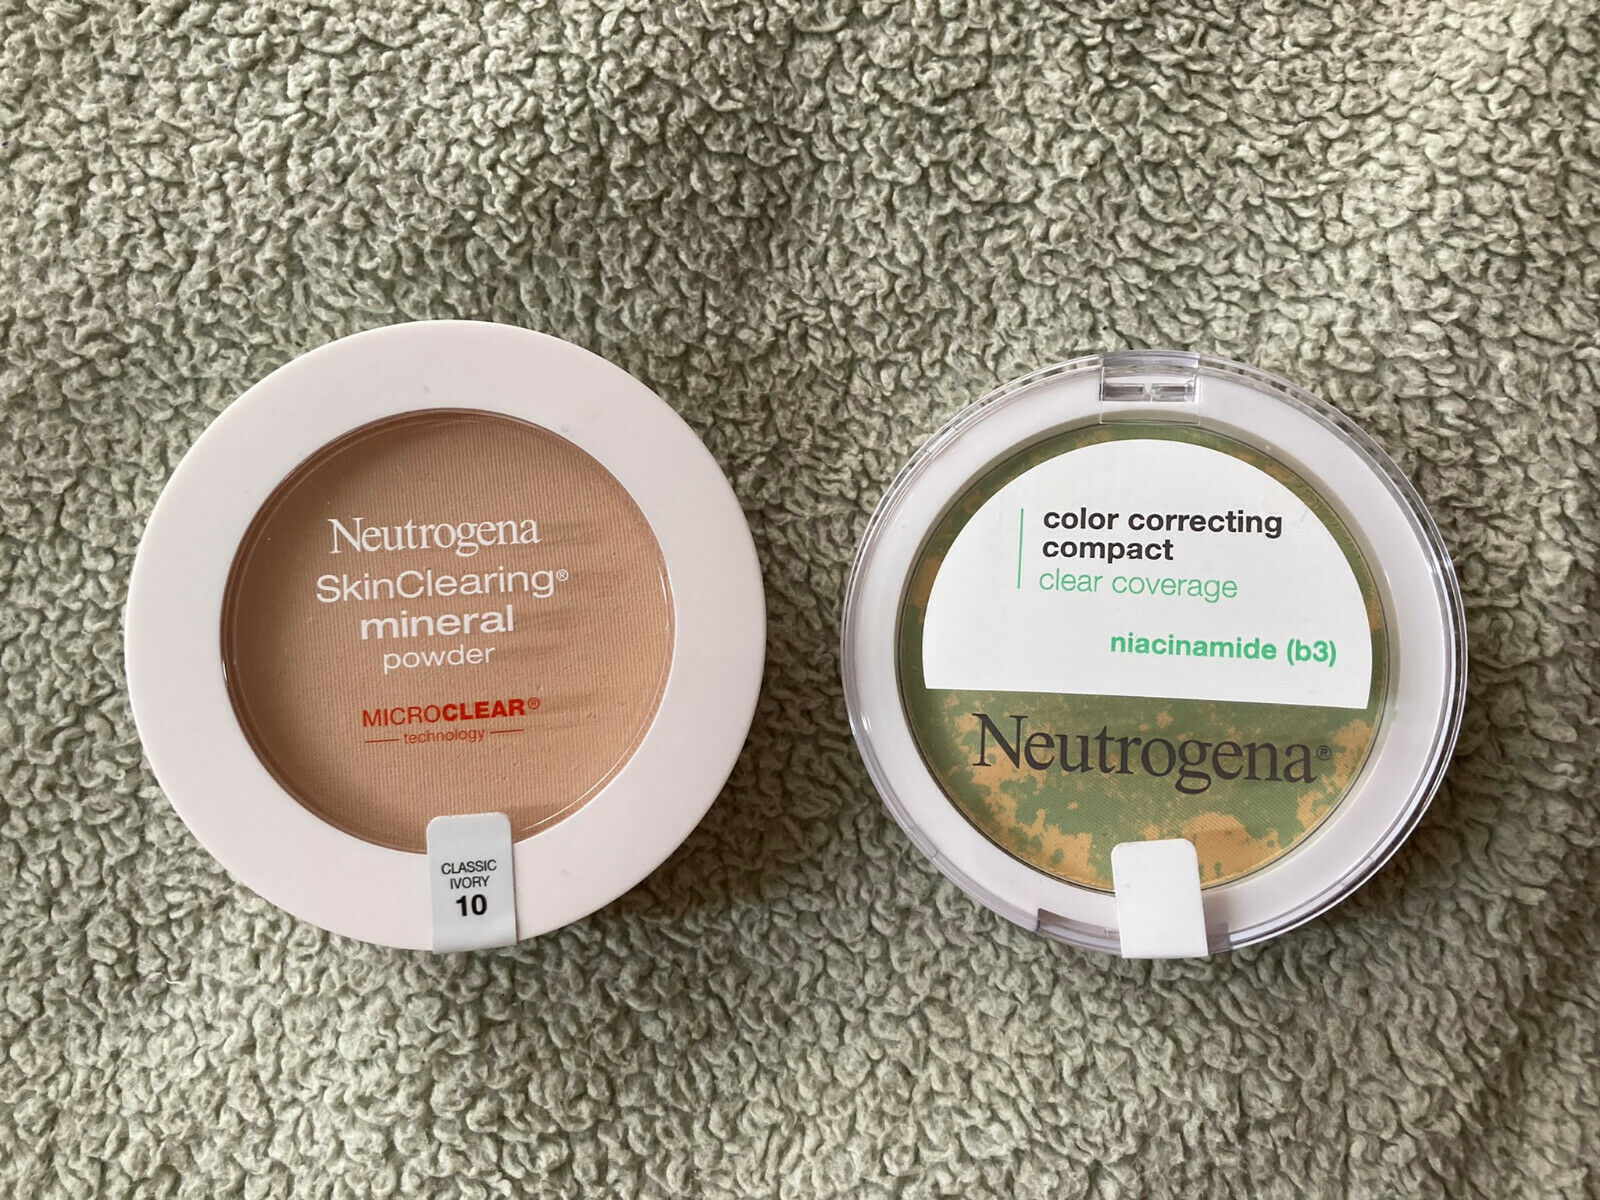 (2)Neutrogena Face Powders: Skin Clearing Mineral Powder +ColorCorrecting Clear  - $20.00